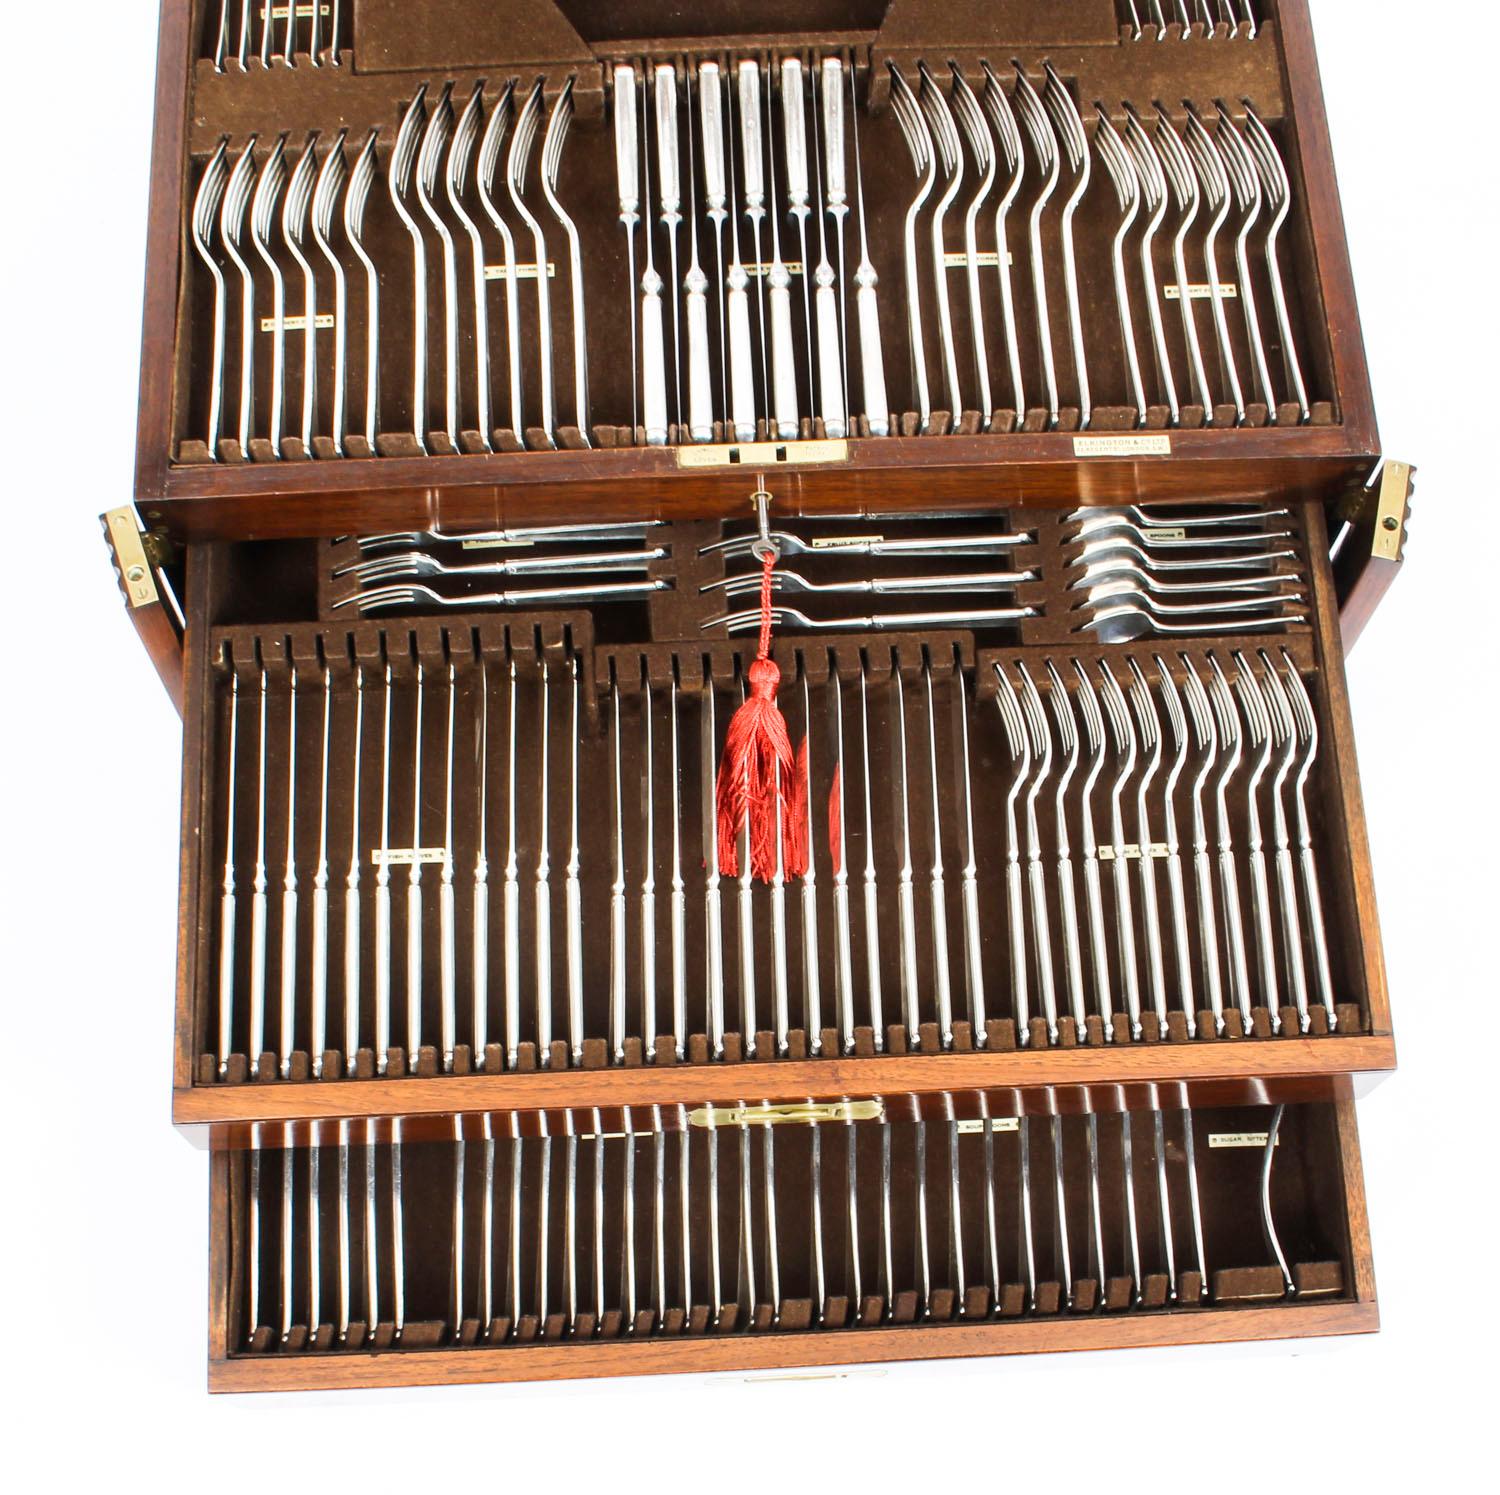 English Antique Canteen 12 Silver Plated Cutlery Set by Elkington, 1930